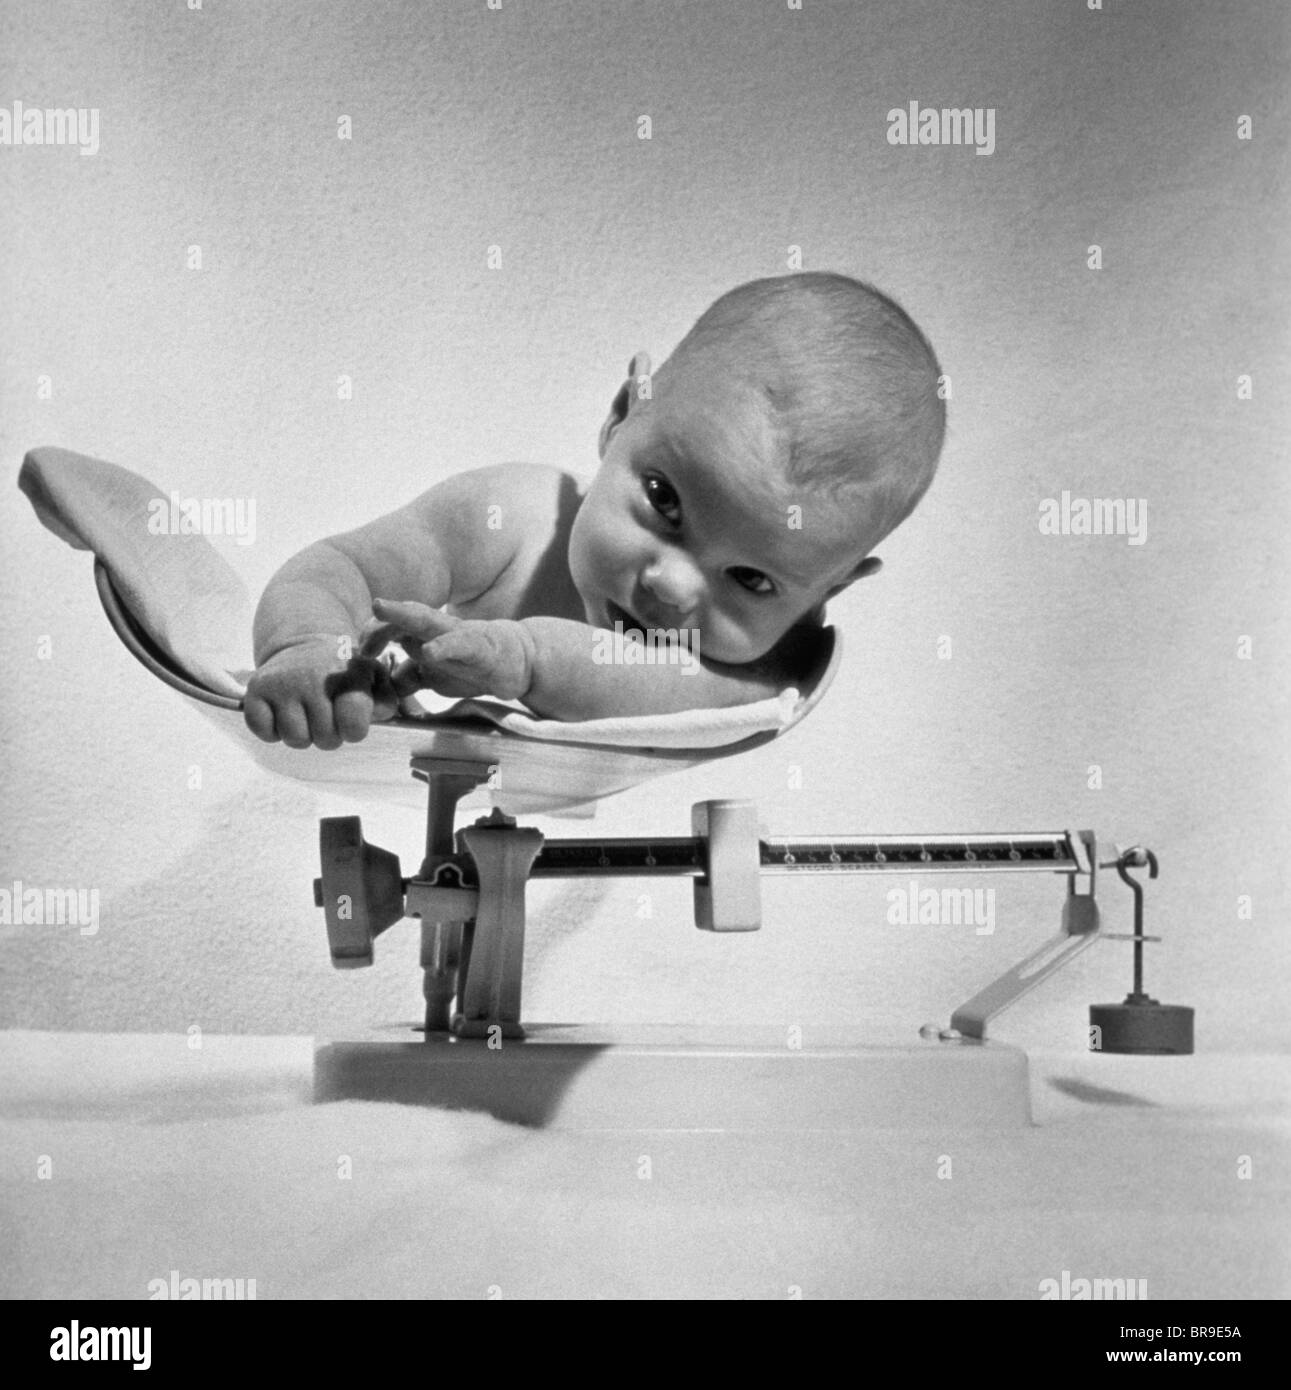 https://c8.alamy.com/comp/BR9E5A/1940s-1950s-baby-lying-on-scale-being-weighed-BR9E5A.jpg